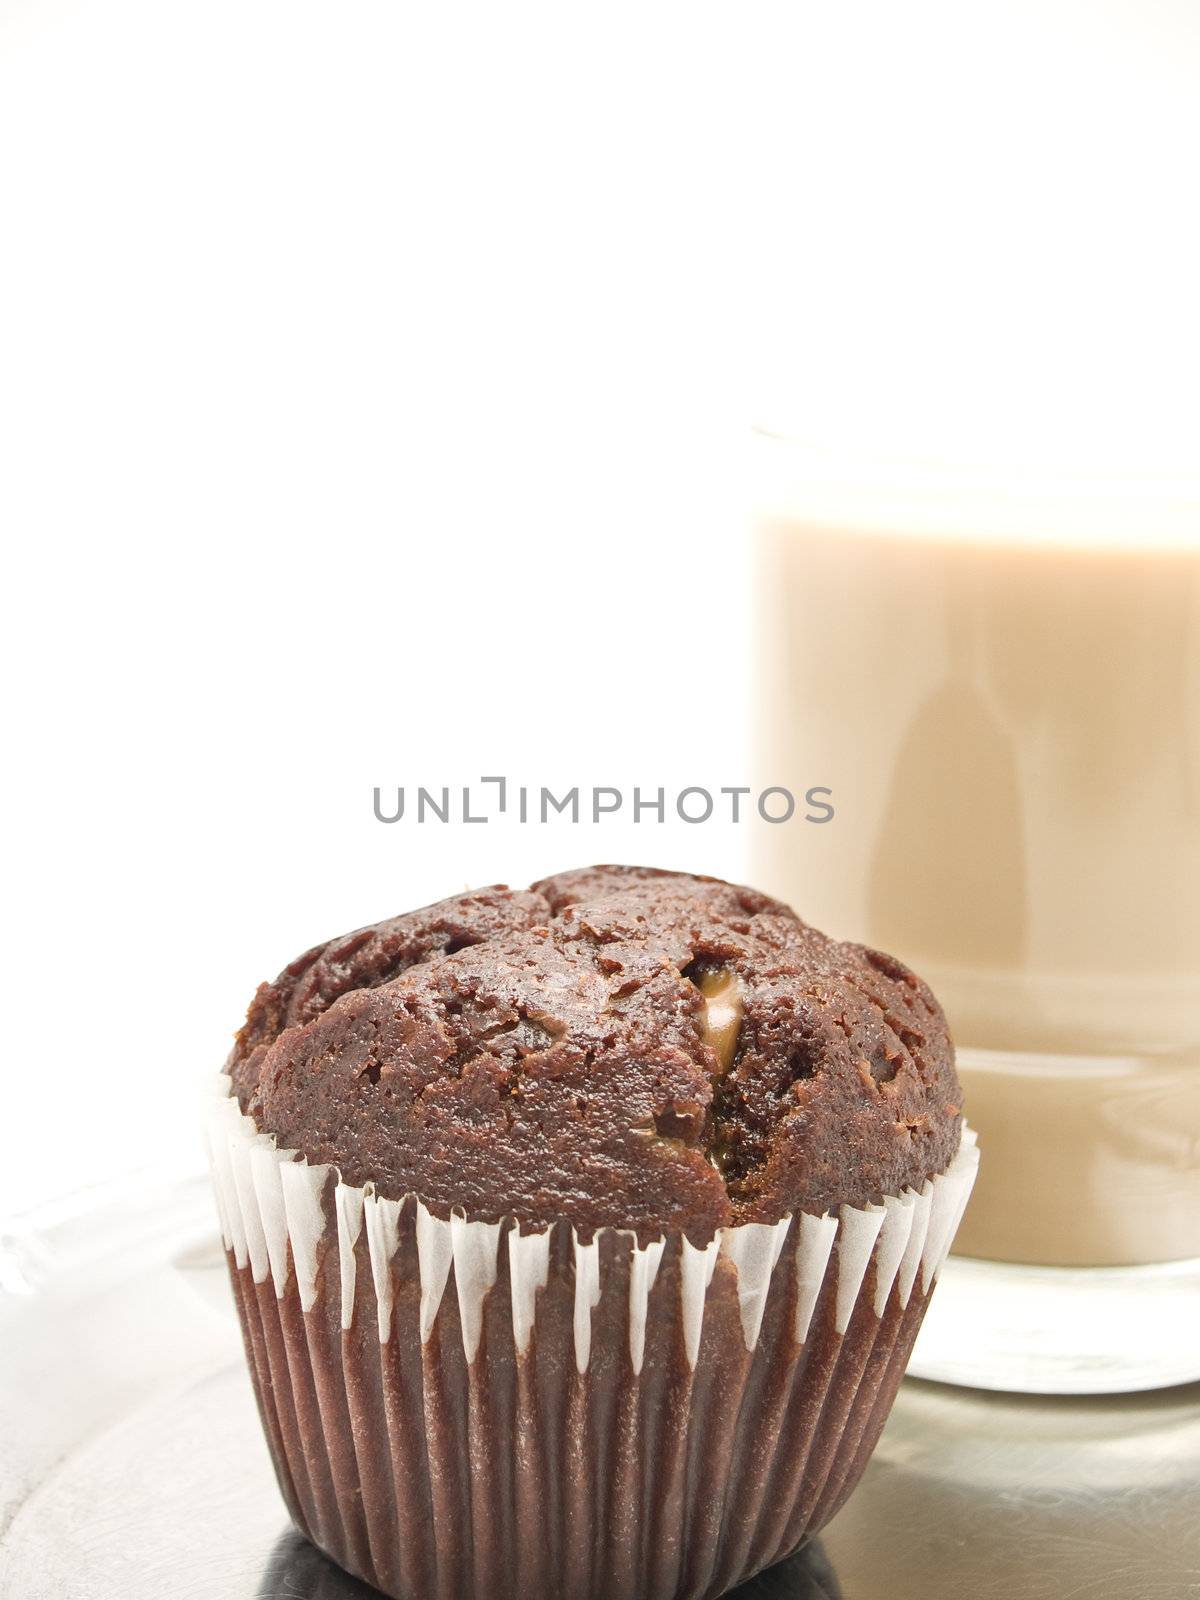 	
muffins and coffee with milk